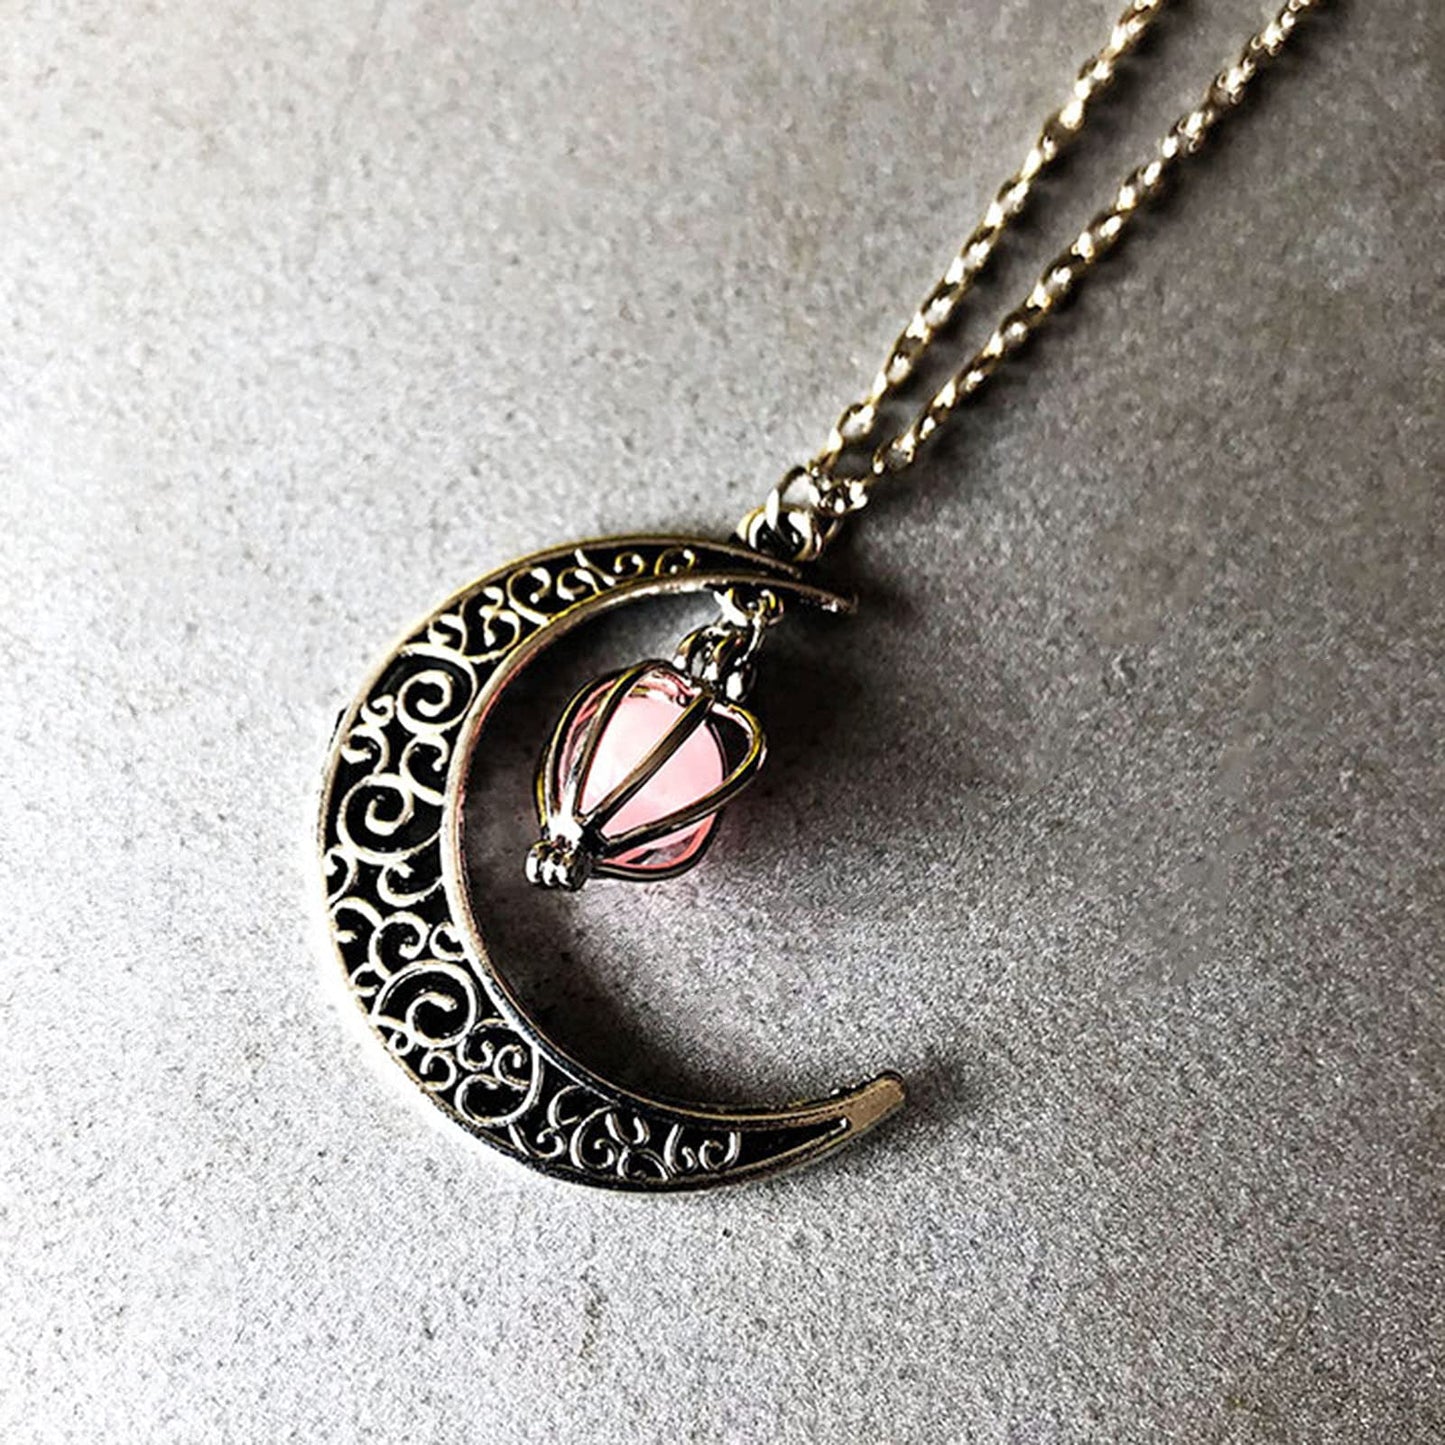 Halloween Spooky Hollow Moon Necklace Love Necklace